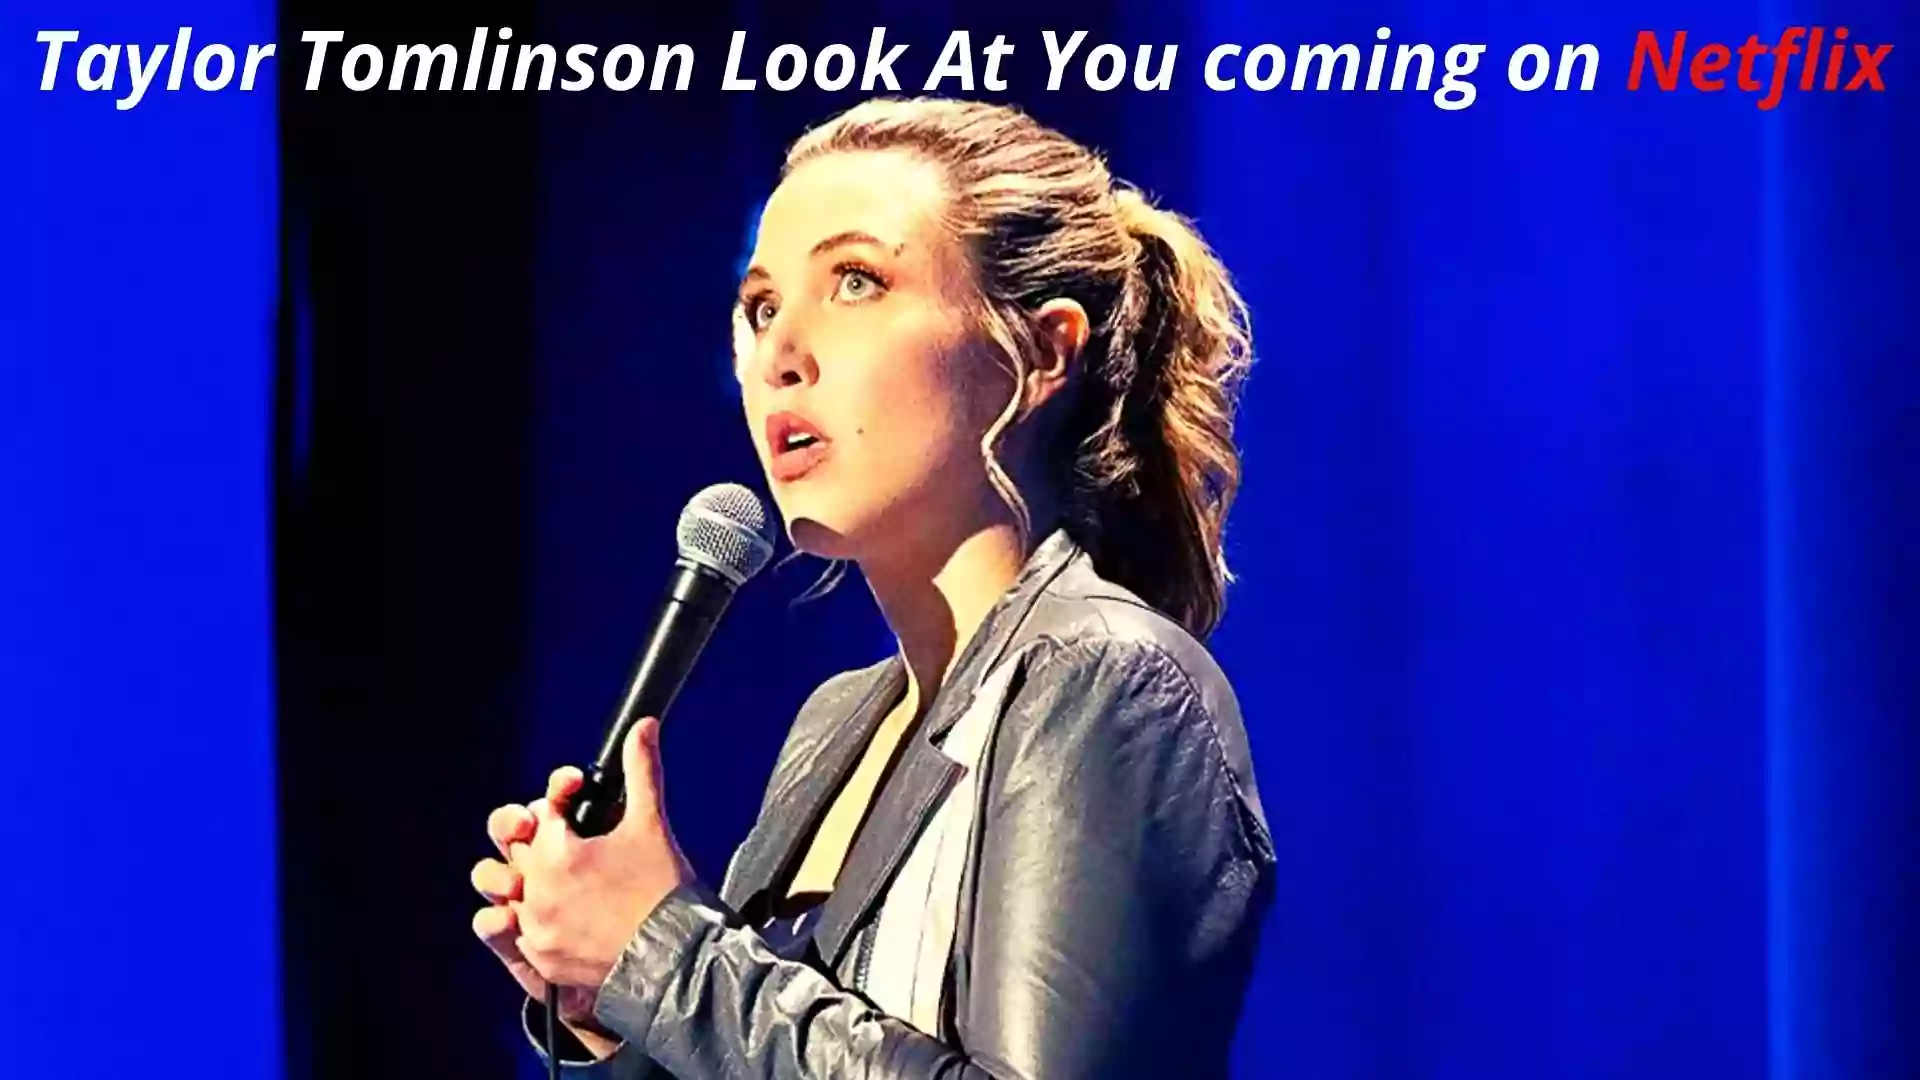 Taylor Tomlinson Look At You Parents guide| 2022